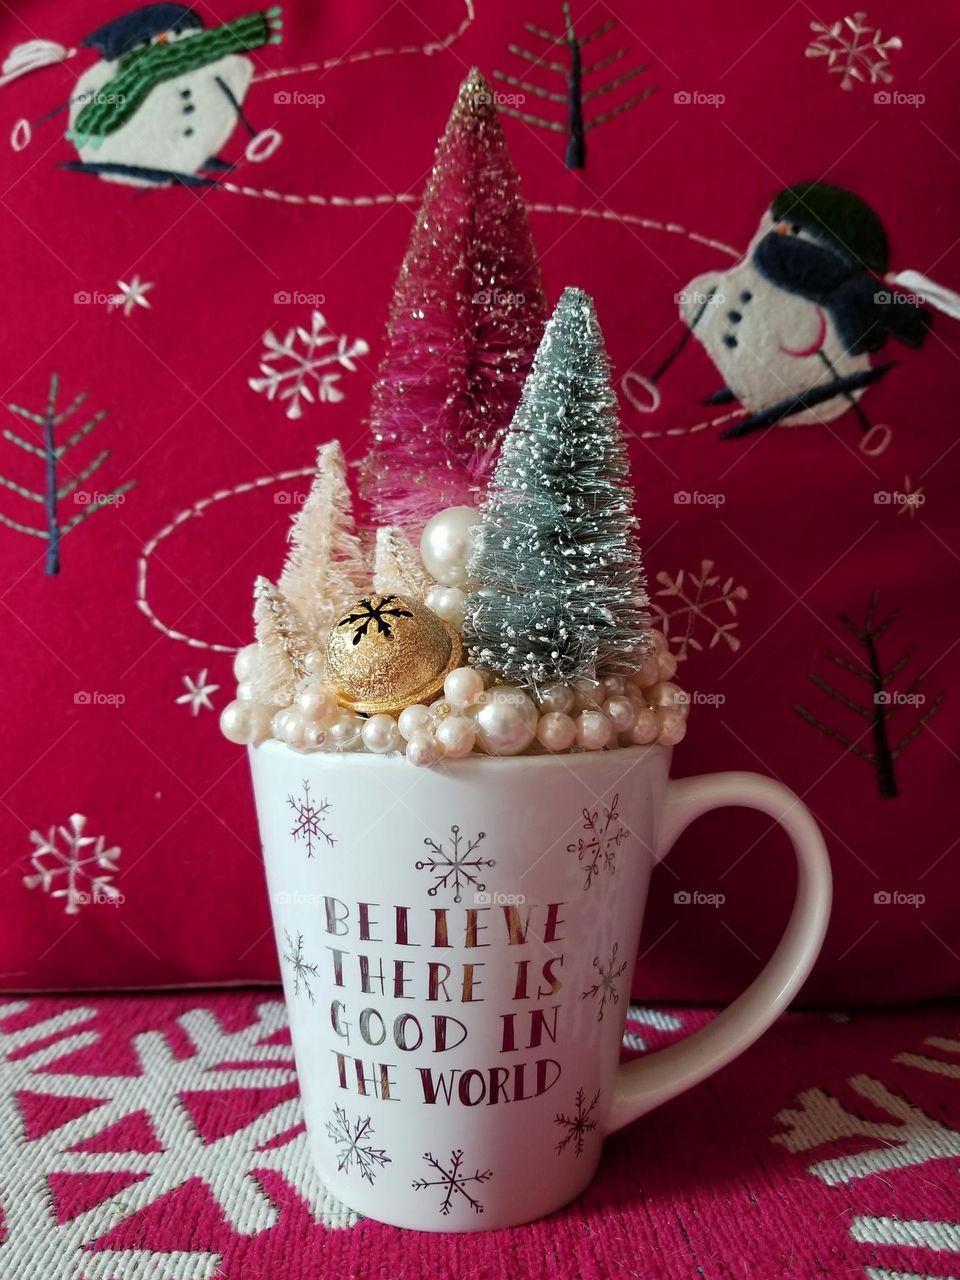 Magenta Christmas Decor with Snowman trees mug with Believe there is good in the world written on it